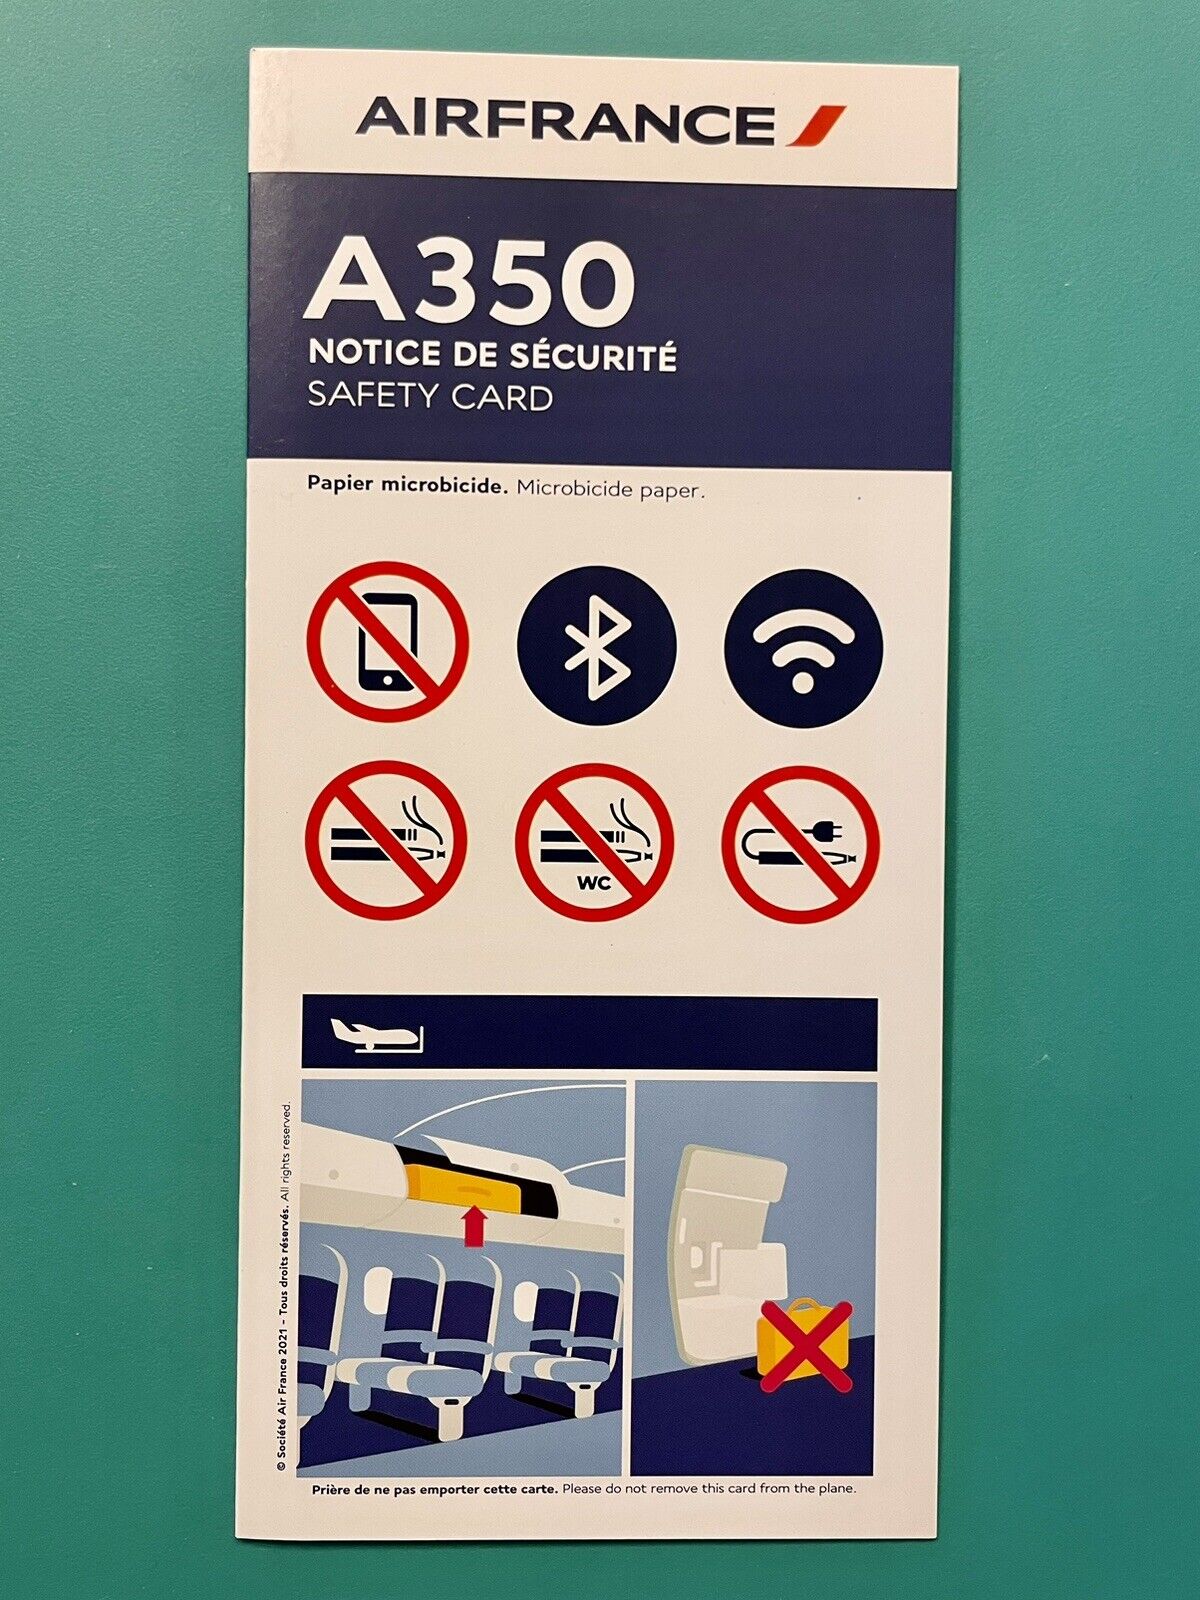 2022 AIR FRANCE SAFETY CARD — AIRBUS 350